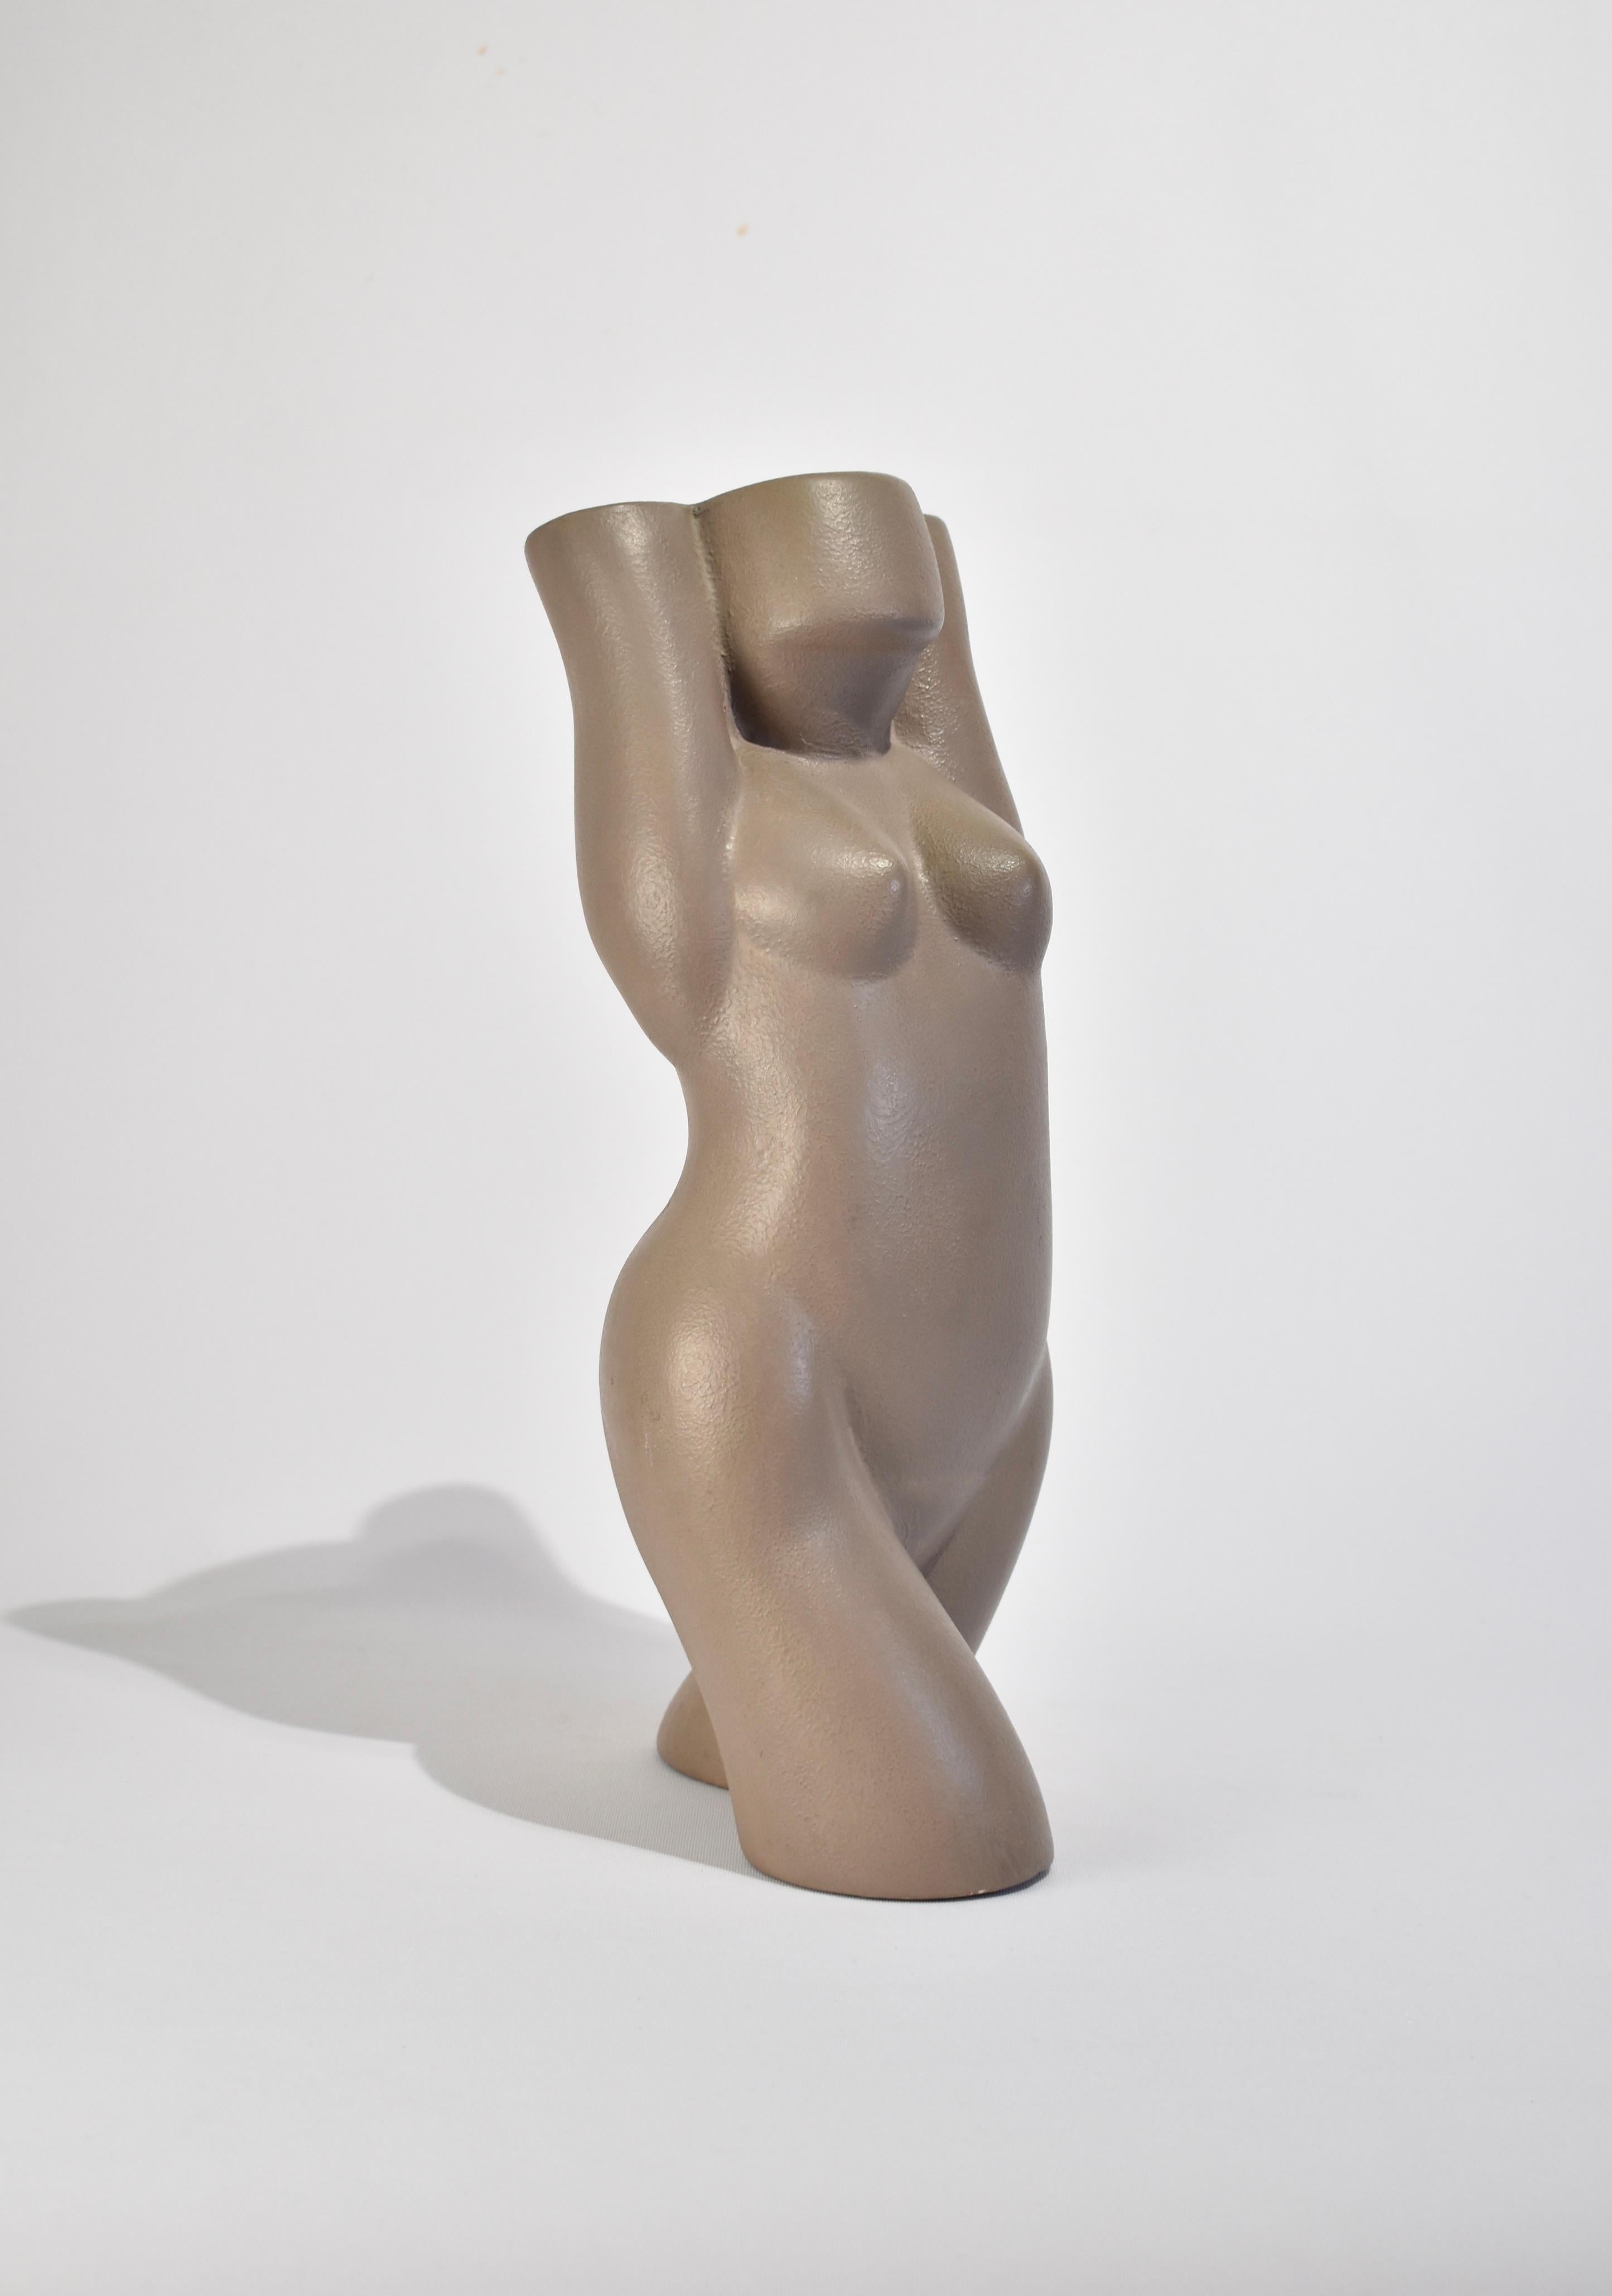 Hand-Crafted Ceramic Figure Sculpture For Sale